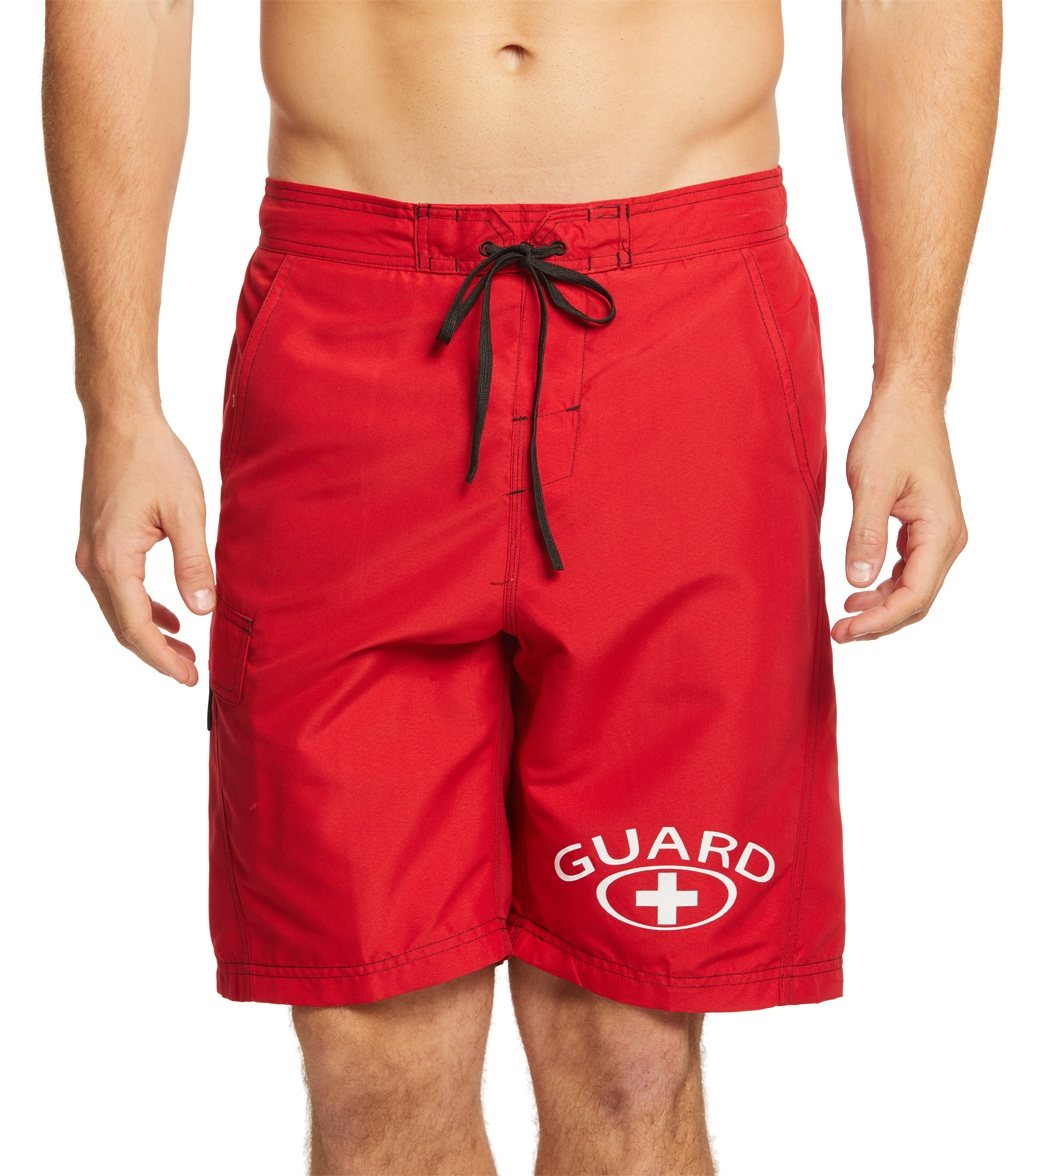 Waterpro Men's Guard Cargo Trunk Swimsuit Shorts - Red Xl Polyester - Swimoutlet.com